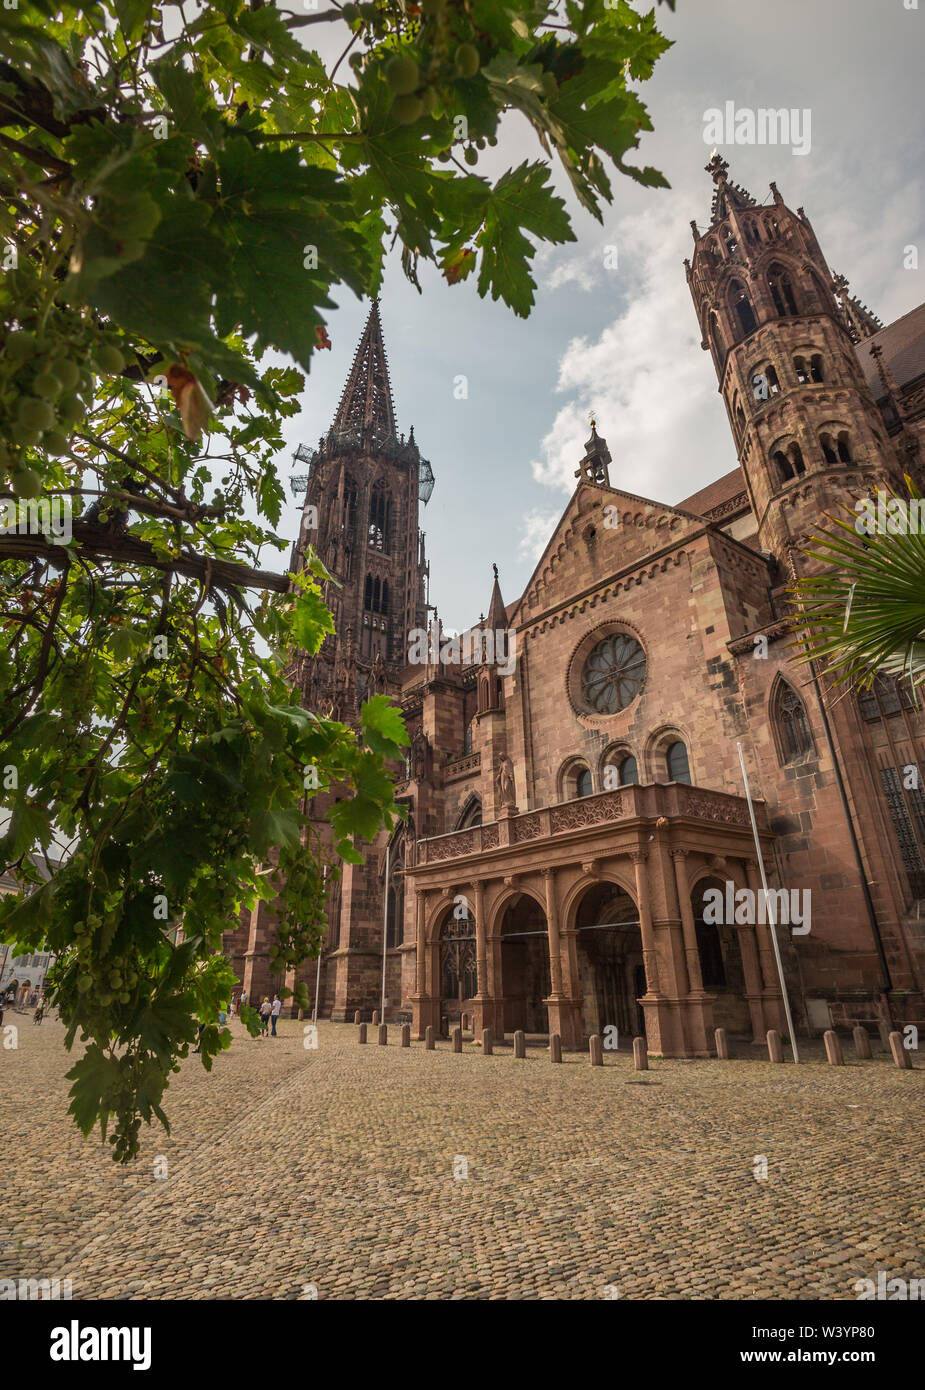 The famous Cathedral Freiburger Münster in Freiburg, Germany Stock Photo